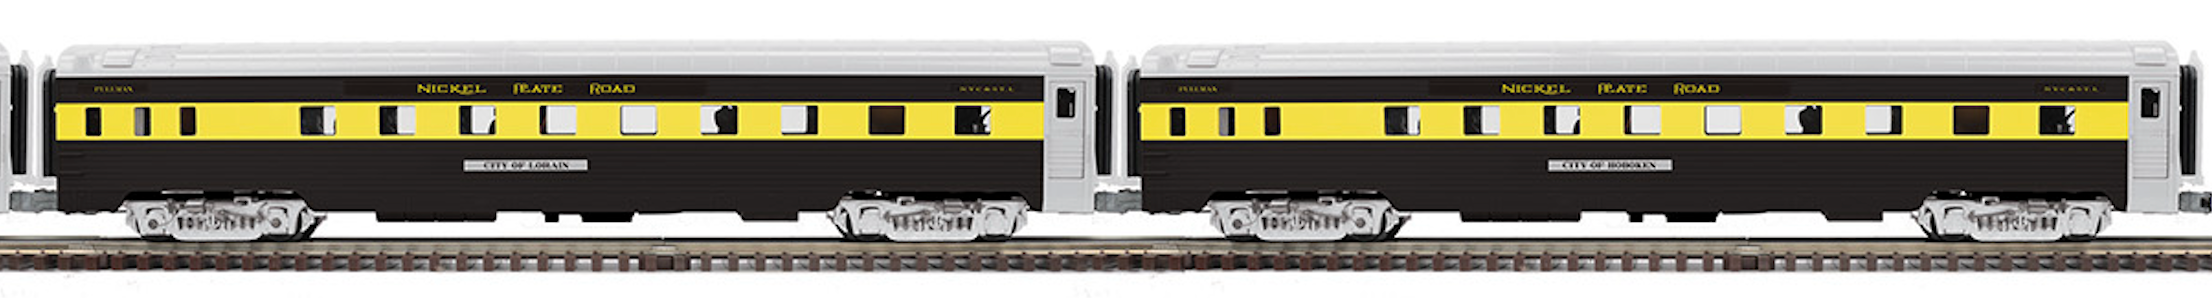 MTH 20-21892-1 - Alco PA A Unit Diesel Locomotive "Nickel Plate Road" #213A w/ PS3 + 4-Car Passenger Set (Black & Gold) - Custom Run for MrMuffin'sTrains